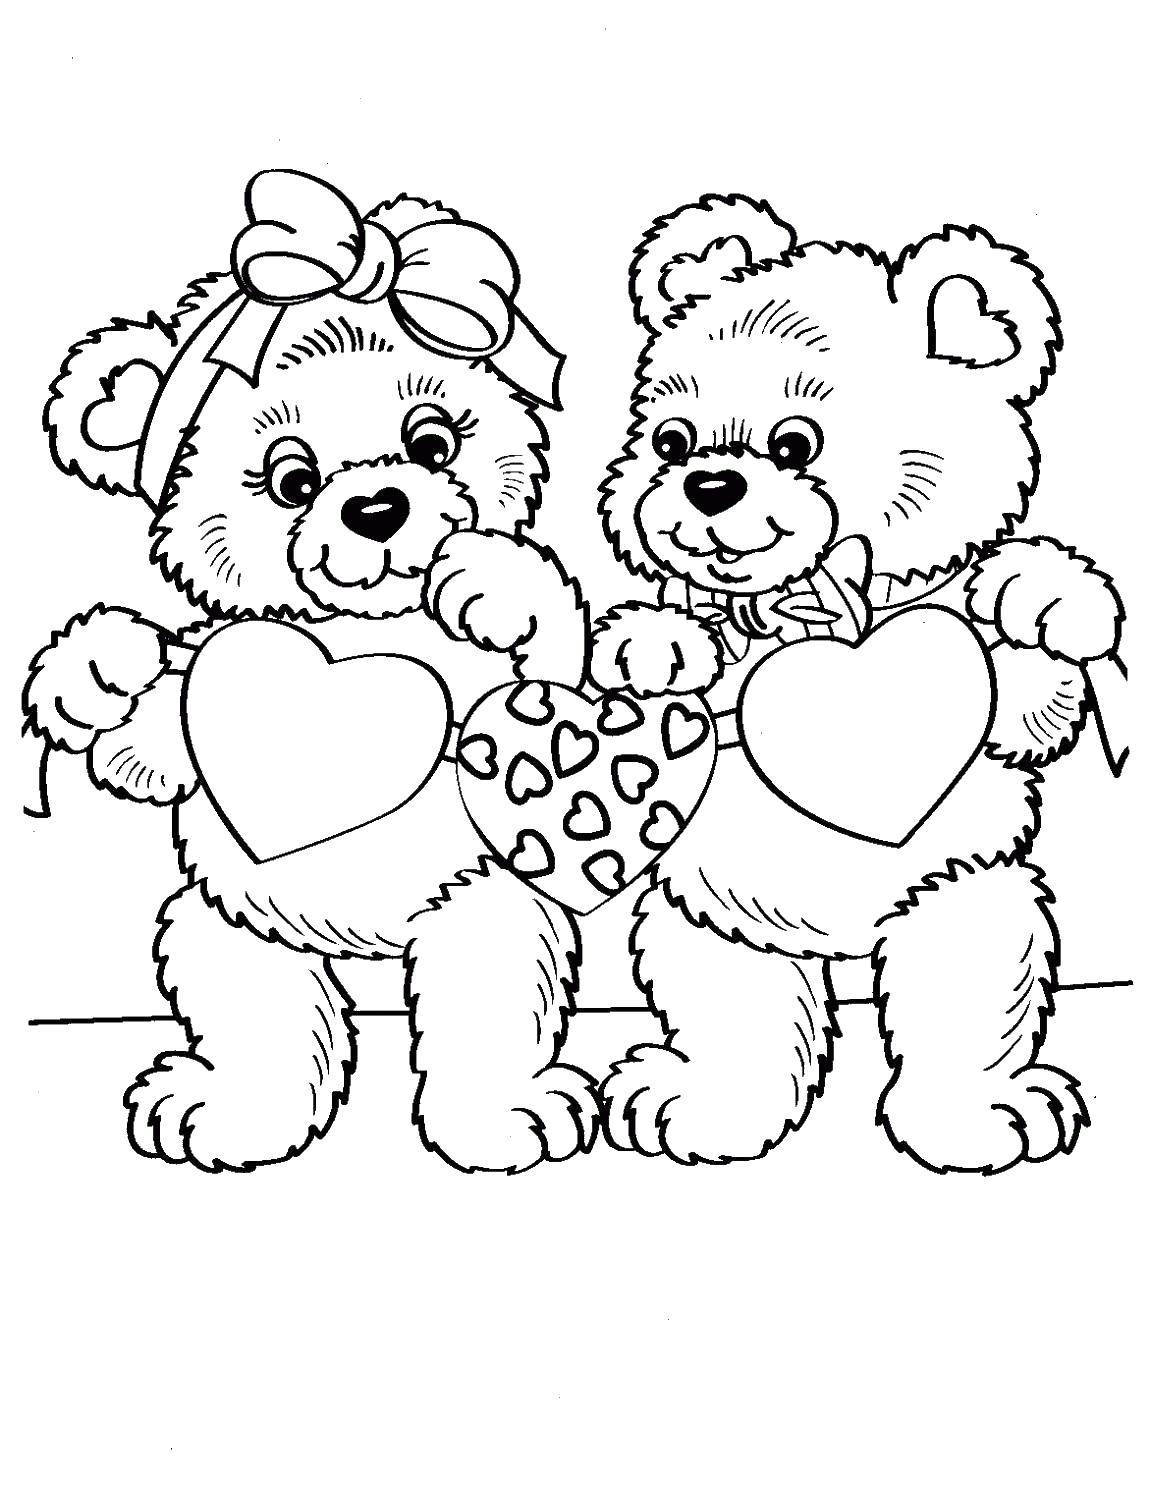 Coloring Lovers bears. Category Valentines day. Tags:  Valentines day, love, heart, Teddy bear.